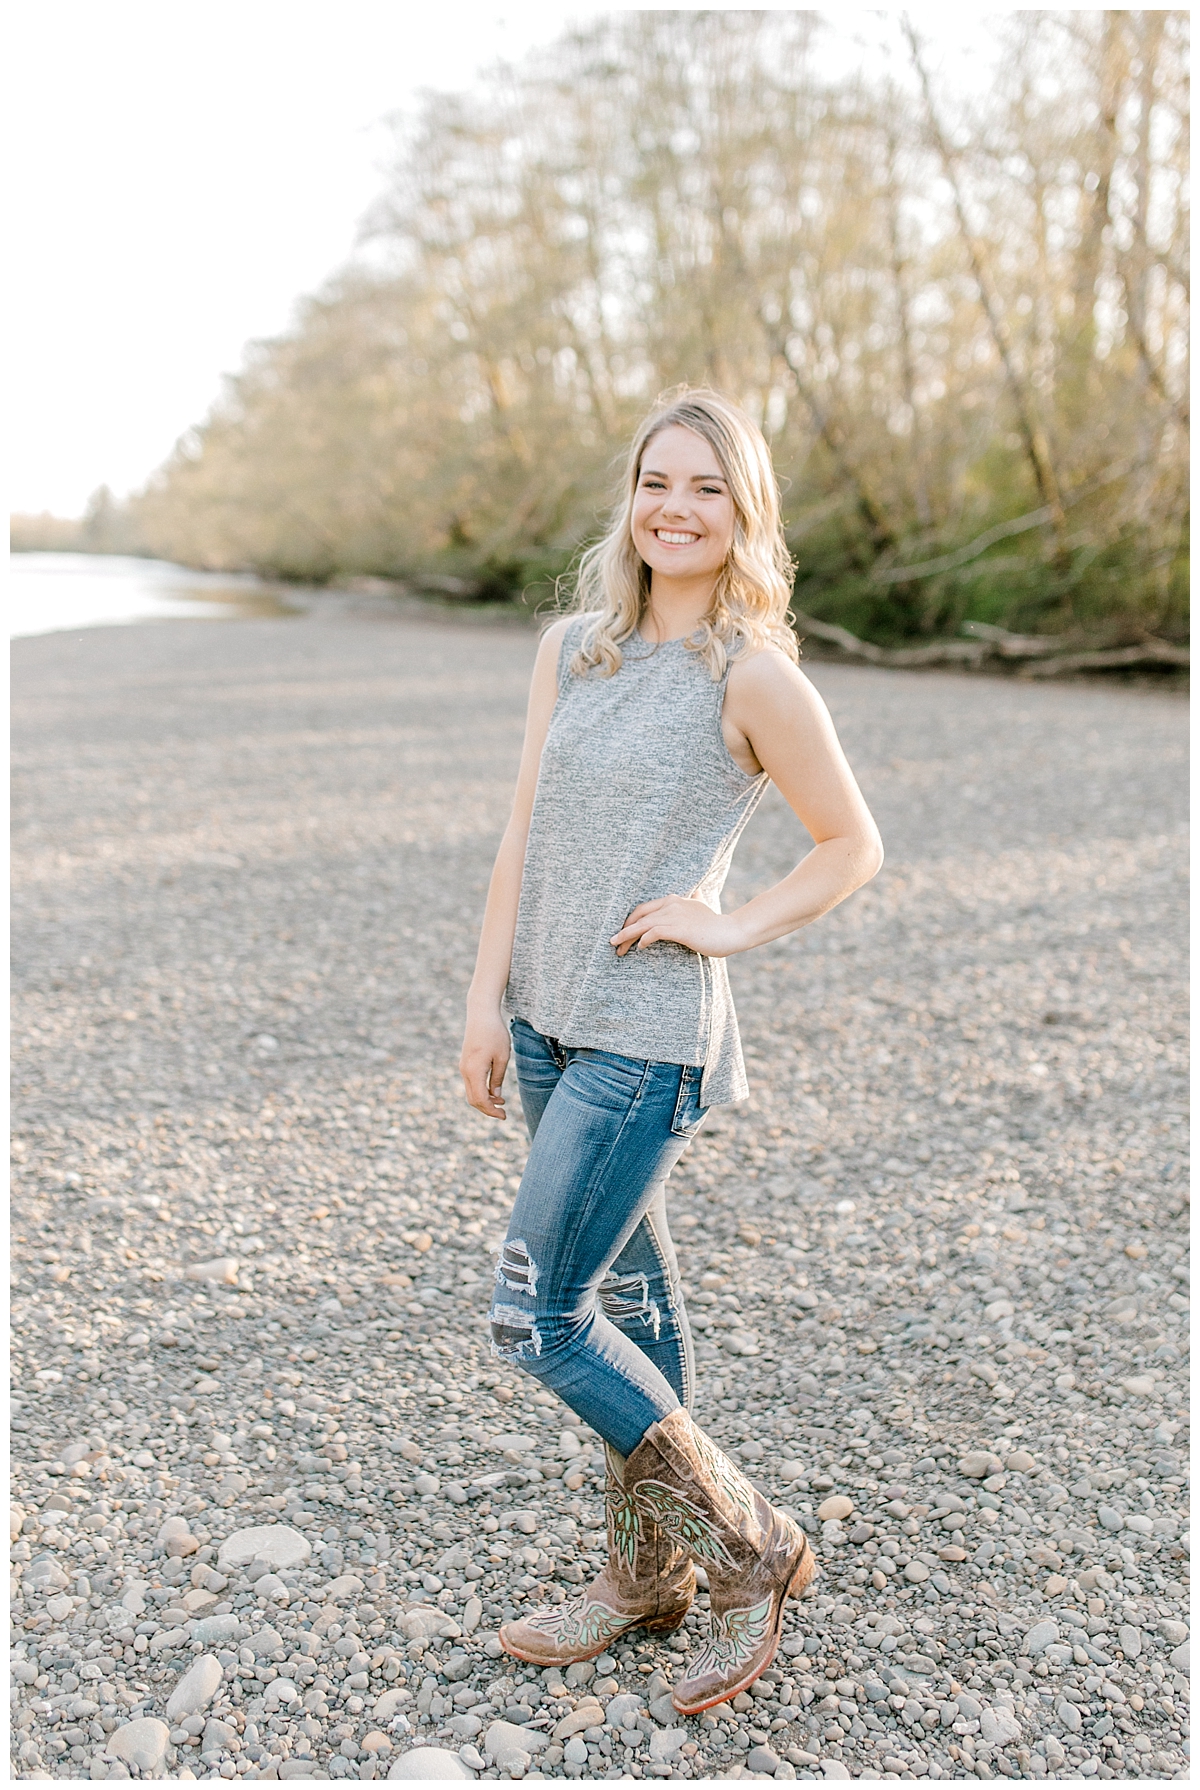 Sunset Senior Session with Horse | Senior Session Inspiration Session | Horse Photo Session | Pacific Northwest Light and Airy Wedding and Portrait Photographer | Emma Rose Company | Kindred Presets Posing Senior Session.jpg